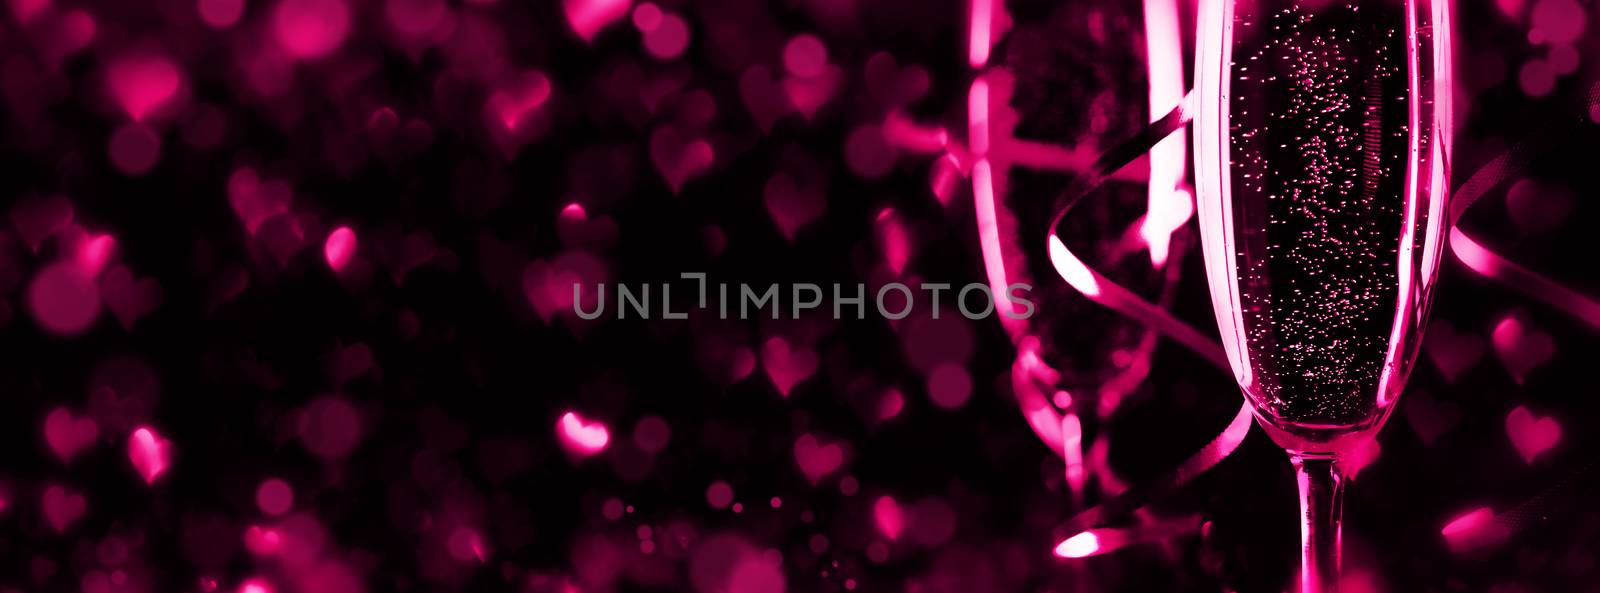 Two glasses of champagne ribbons and heart shaped bokeh lights on black background, Romance, evening, dating, Valentines day concept